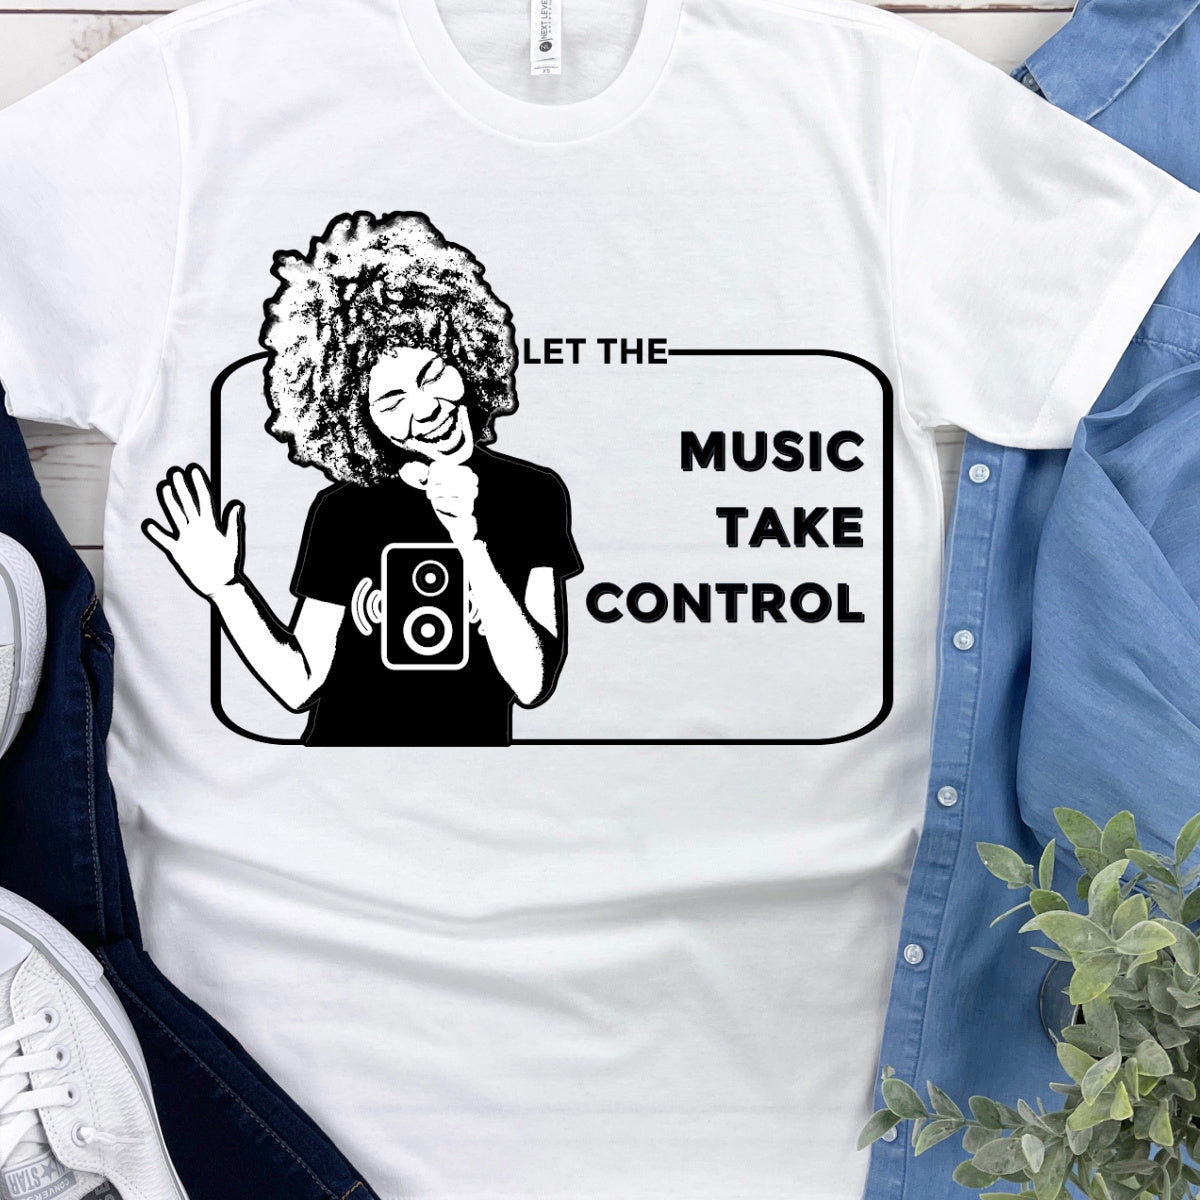 Let the Music Take Control